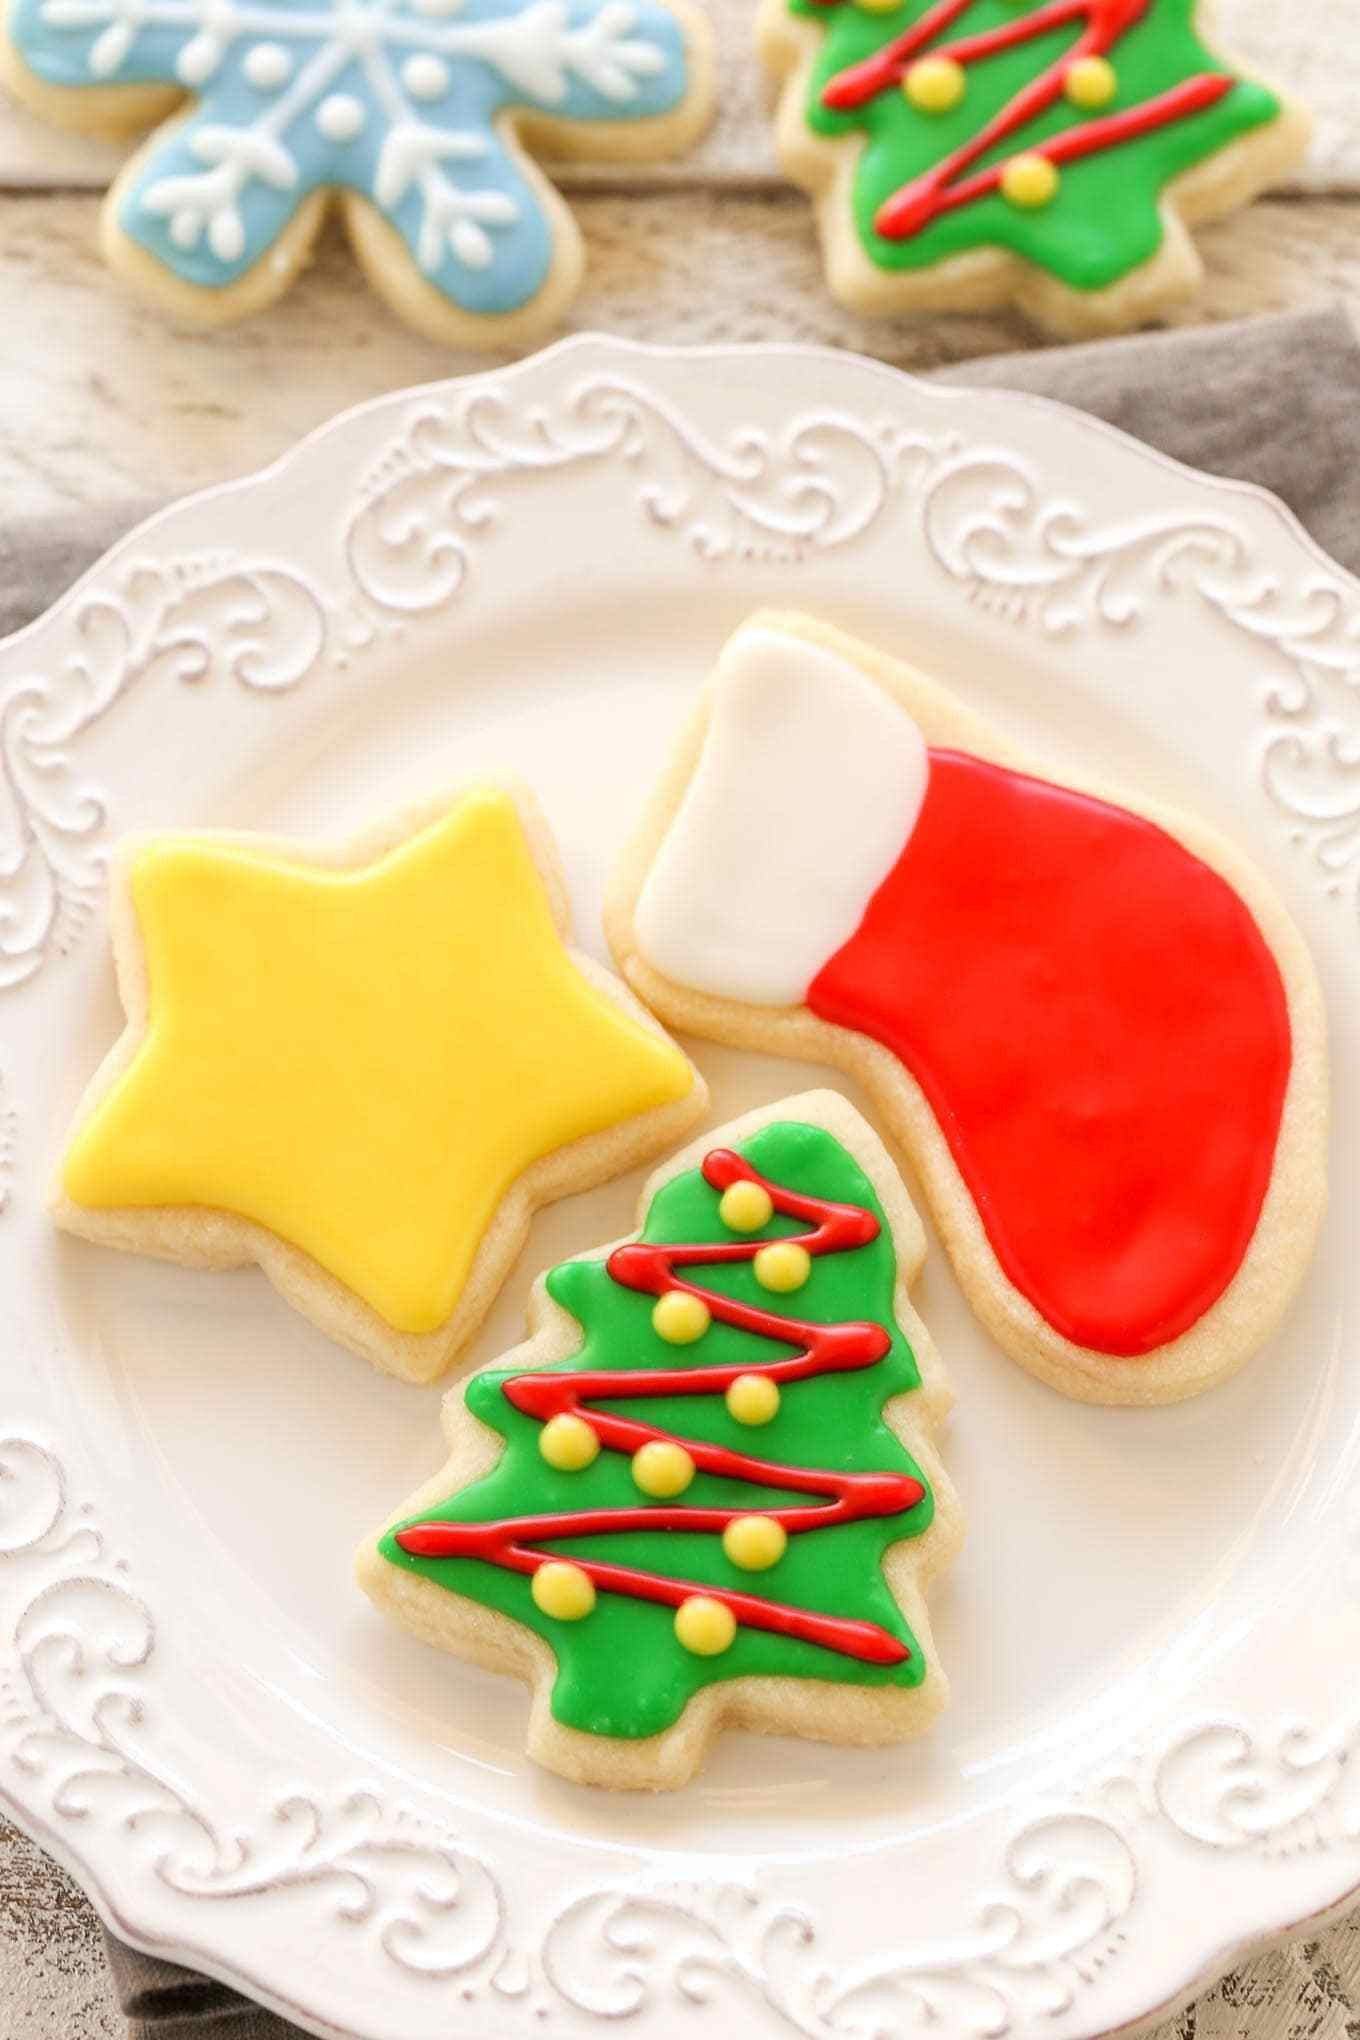 Christmas Decorated Cookies
 Soft Christmas Cut Out Sugar Cookies Live Well Bake ten